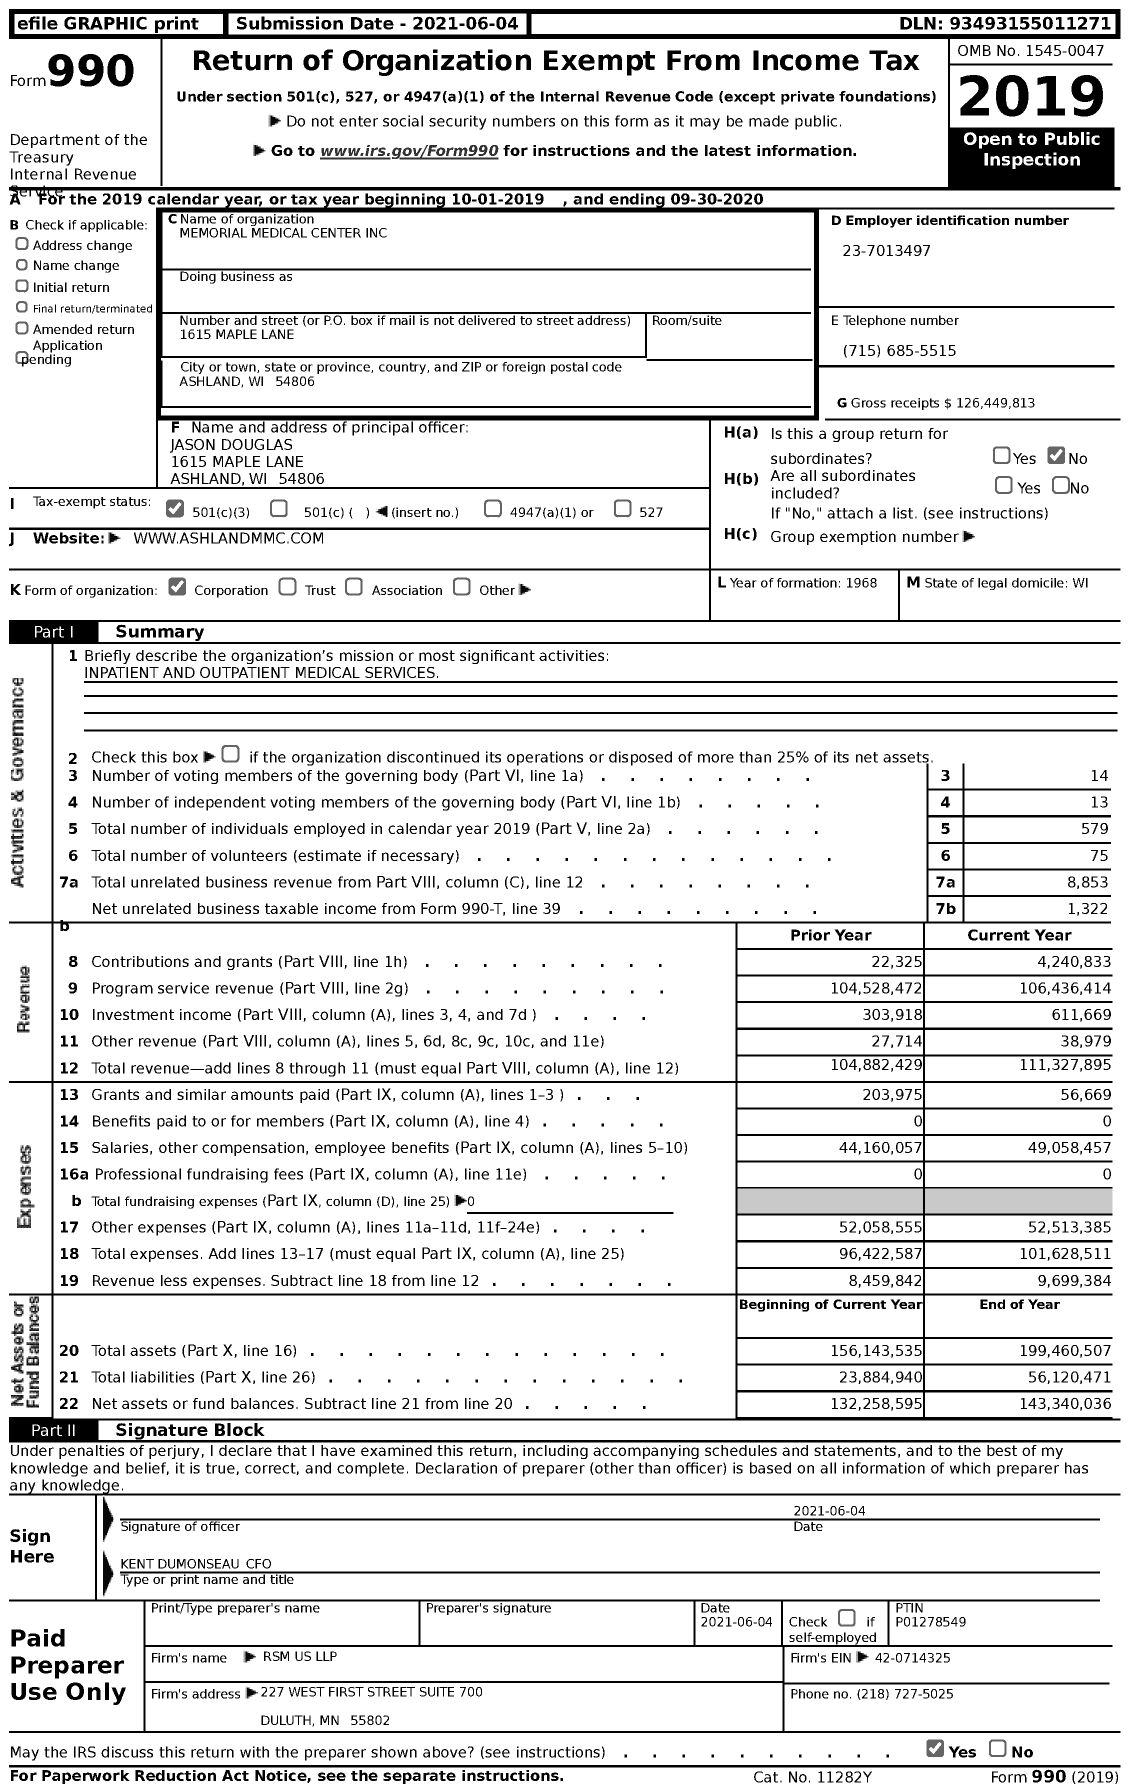 Image of first page of 2019 Form 990 for Memorial Medical Center (MMC)